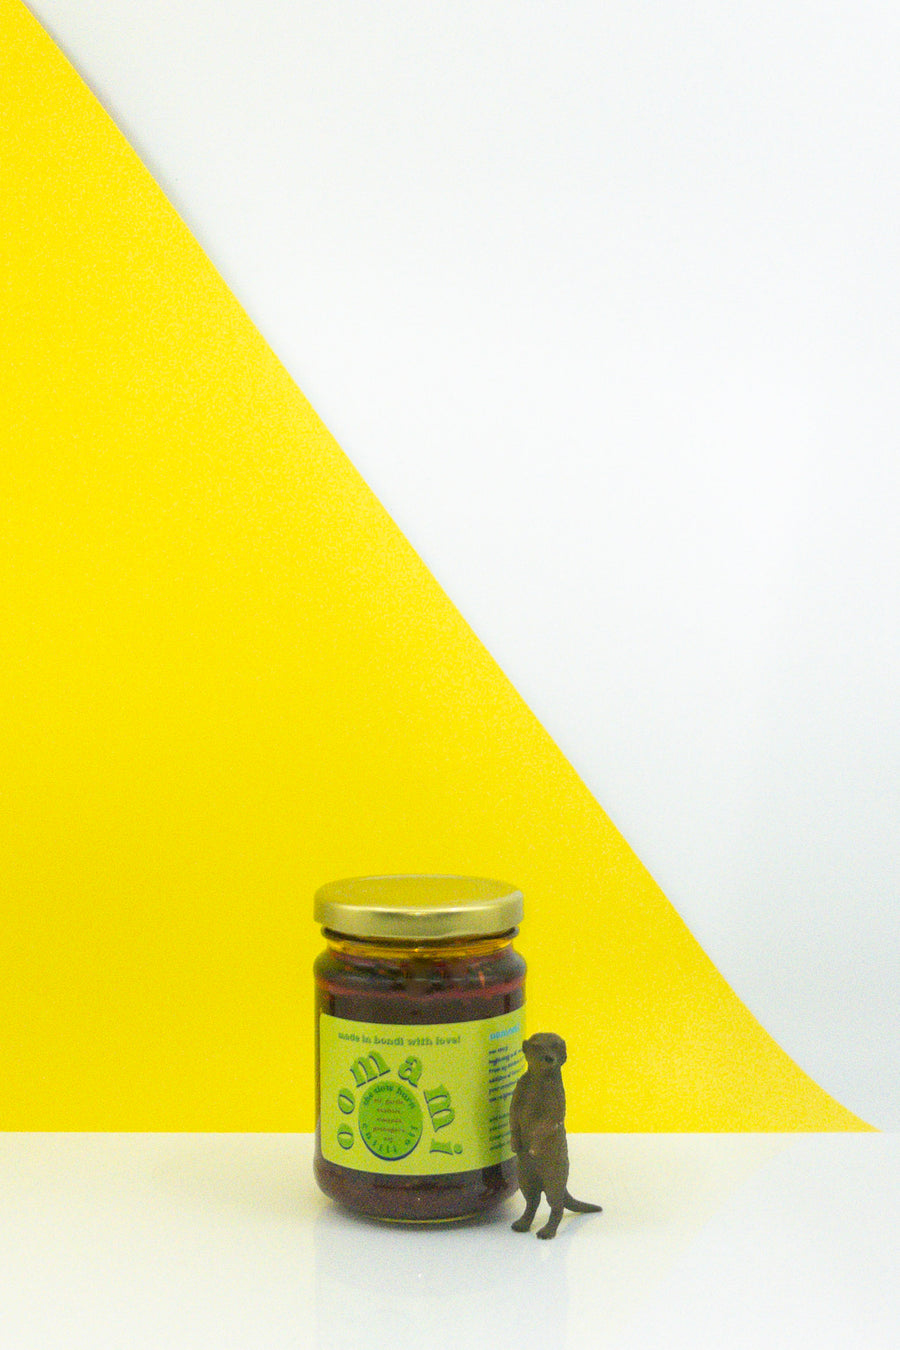 Oomami Sydney The Slow Burn Japanese Chilli Oil